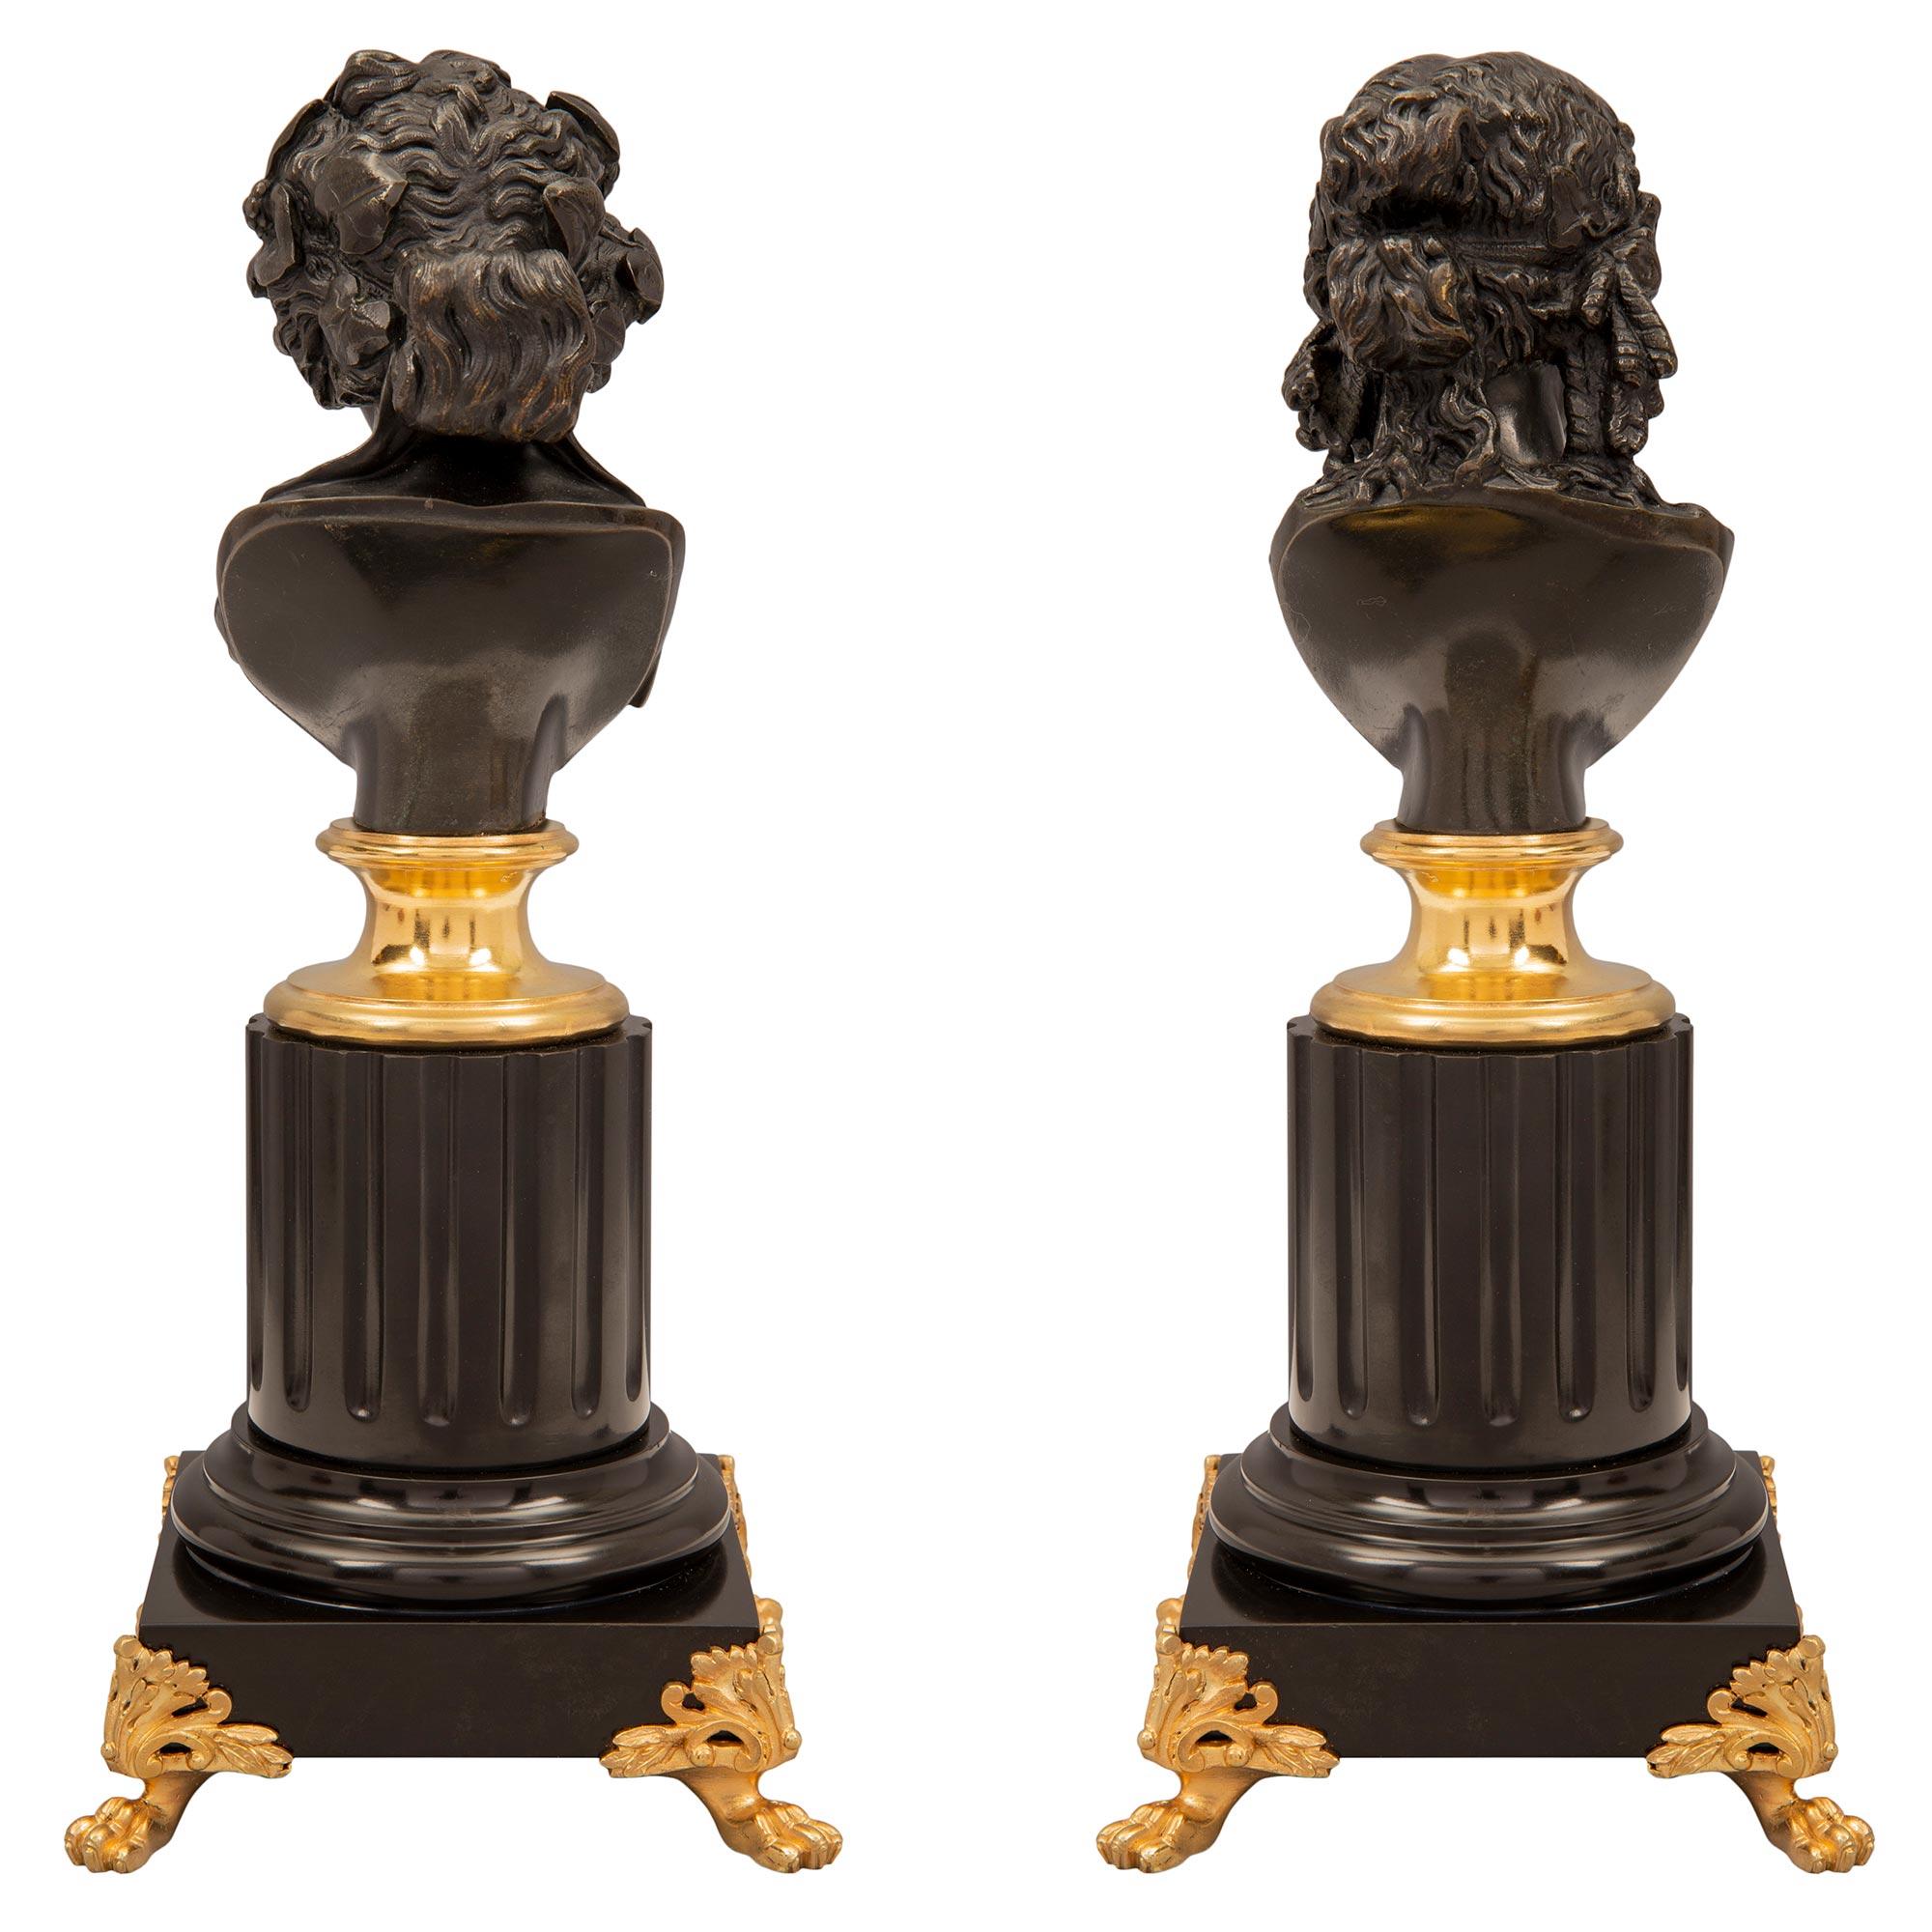 Pair of French 19th Century Louis XVI Style Bronze, Ormolu and Marble Statuettes In Good Condition For Sale In West Palm Beach, FL